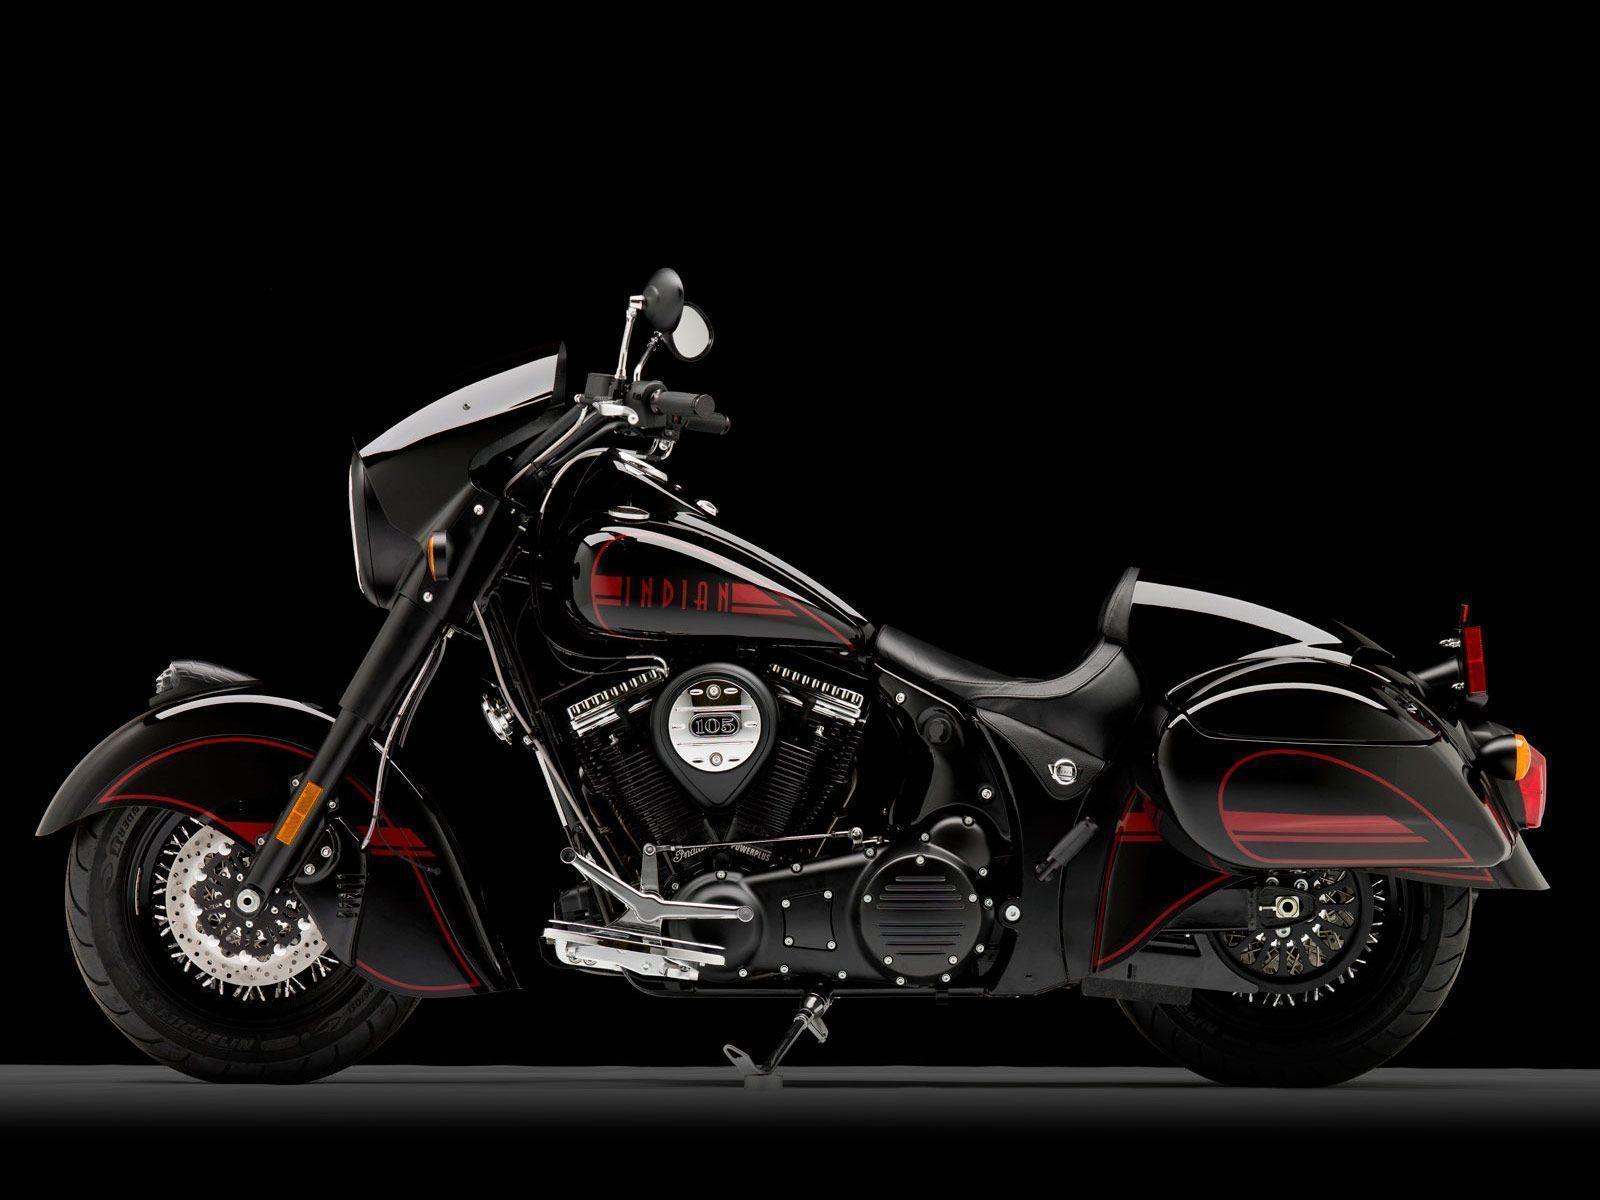 2011 INDIAN Chief Blackhawk accident lawyers